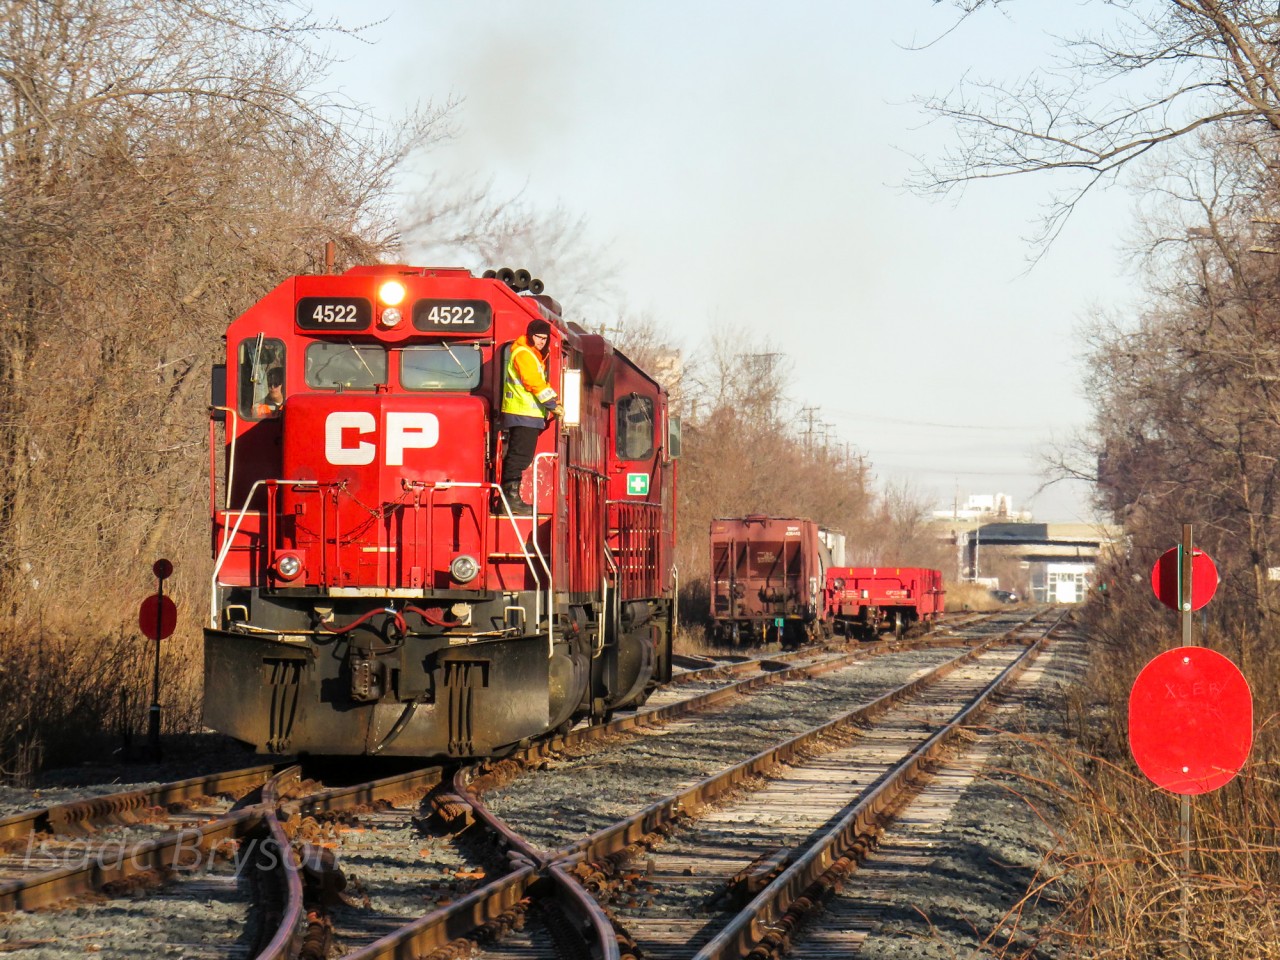 CP T17 makes its way north up the CP Canpa sub with CP 4522 and CP 3117. This day, they were training employees so I am not too sure what happened before I arrived, but after, they lifted the empty coils cars on the west main. Next, they pulled forward and pushed the coils into the siding. After, they ran around their train, and hooking onto the hoppers before switching out Versapet. Finally, they hooked up hoppers from Versapet and headed north to go switch out Area H.